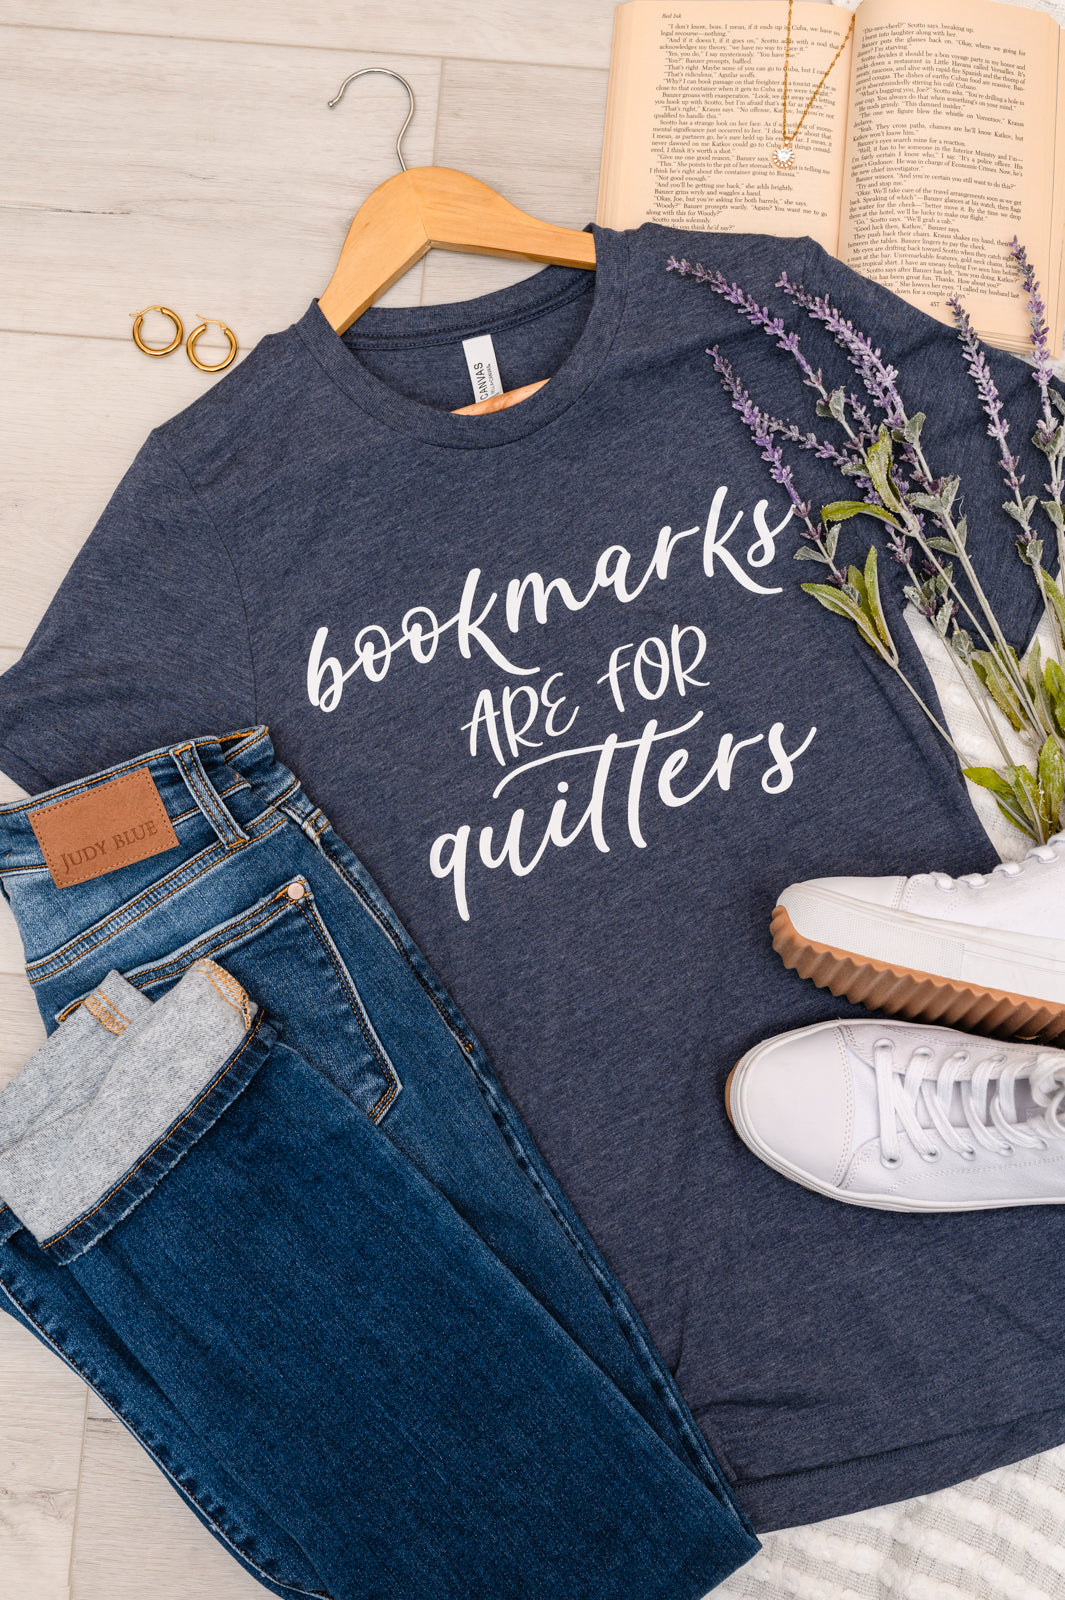 Bookmarks Are For Quitters Tee